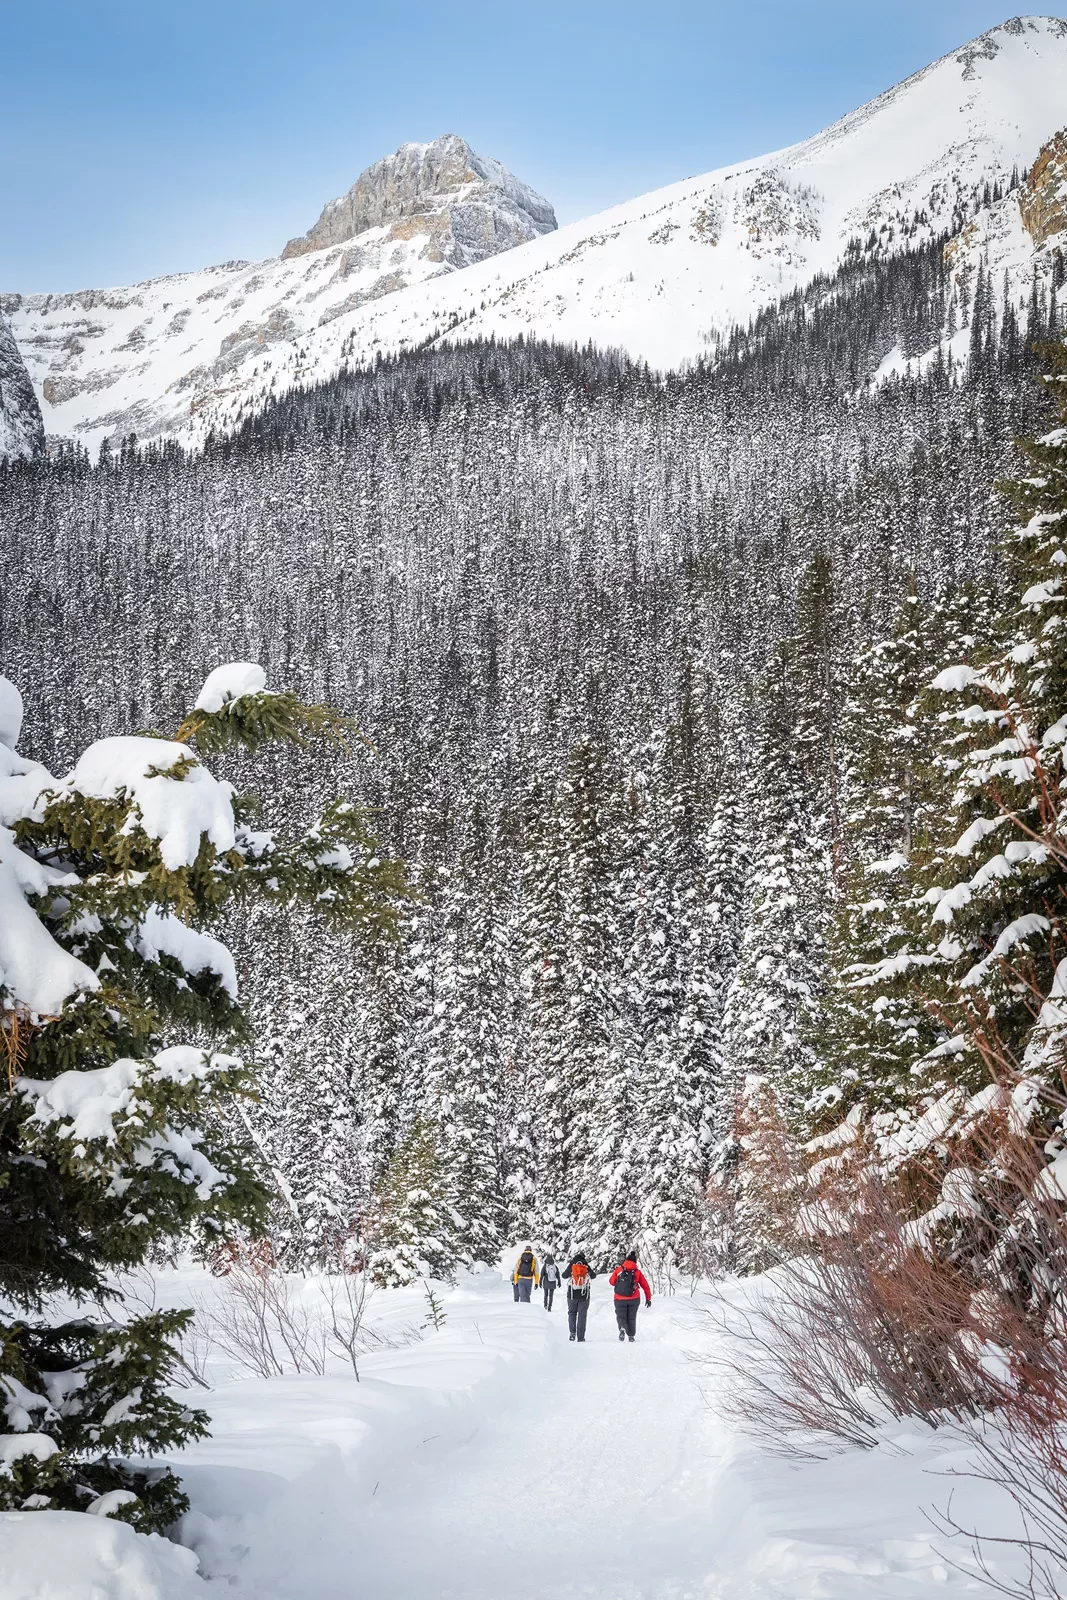 Group of guests walking in snowy forest clearing, large snowcaps in distance.